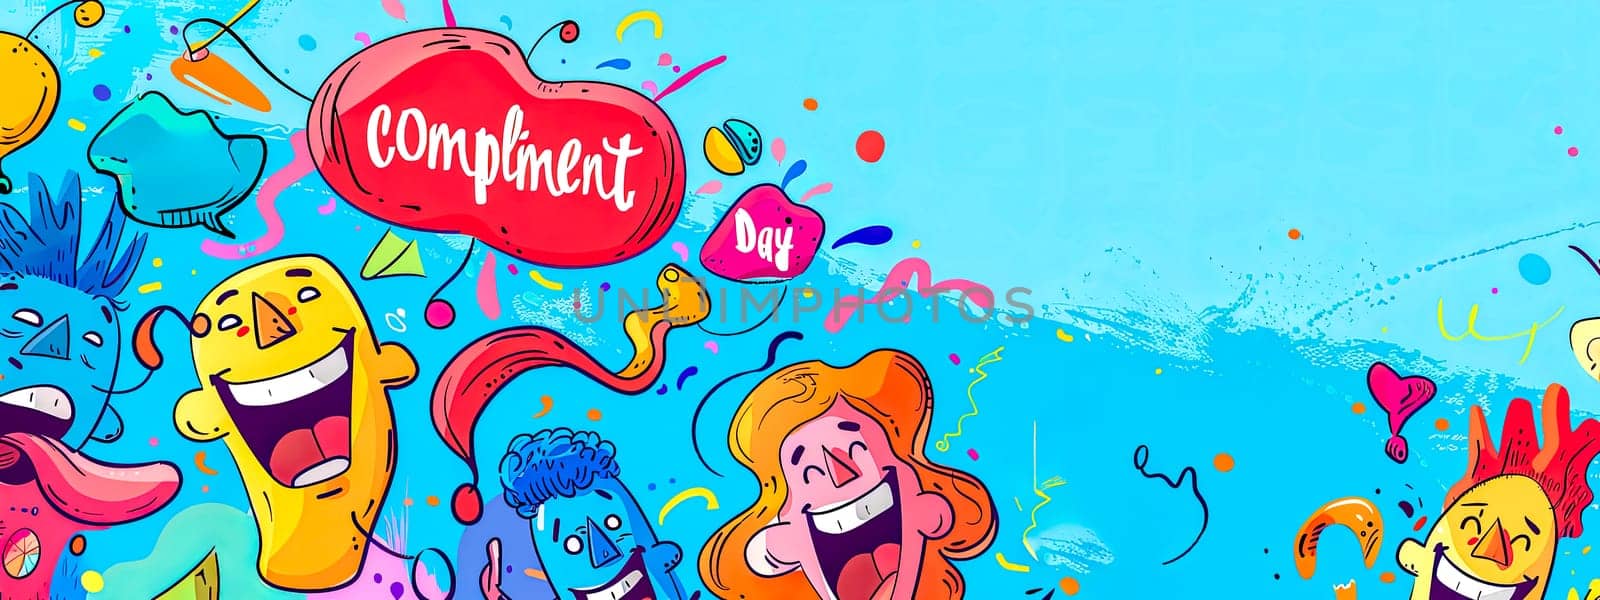 Colorful compliment day celebration banner with happy cartoon characters by Edophoto